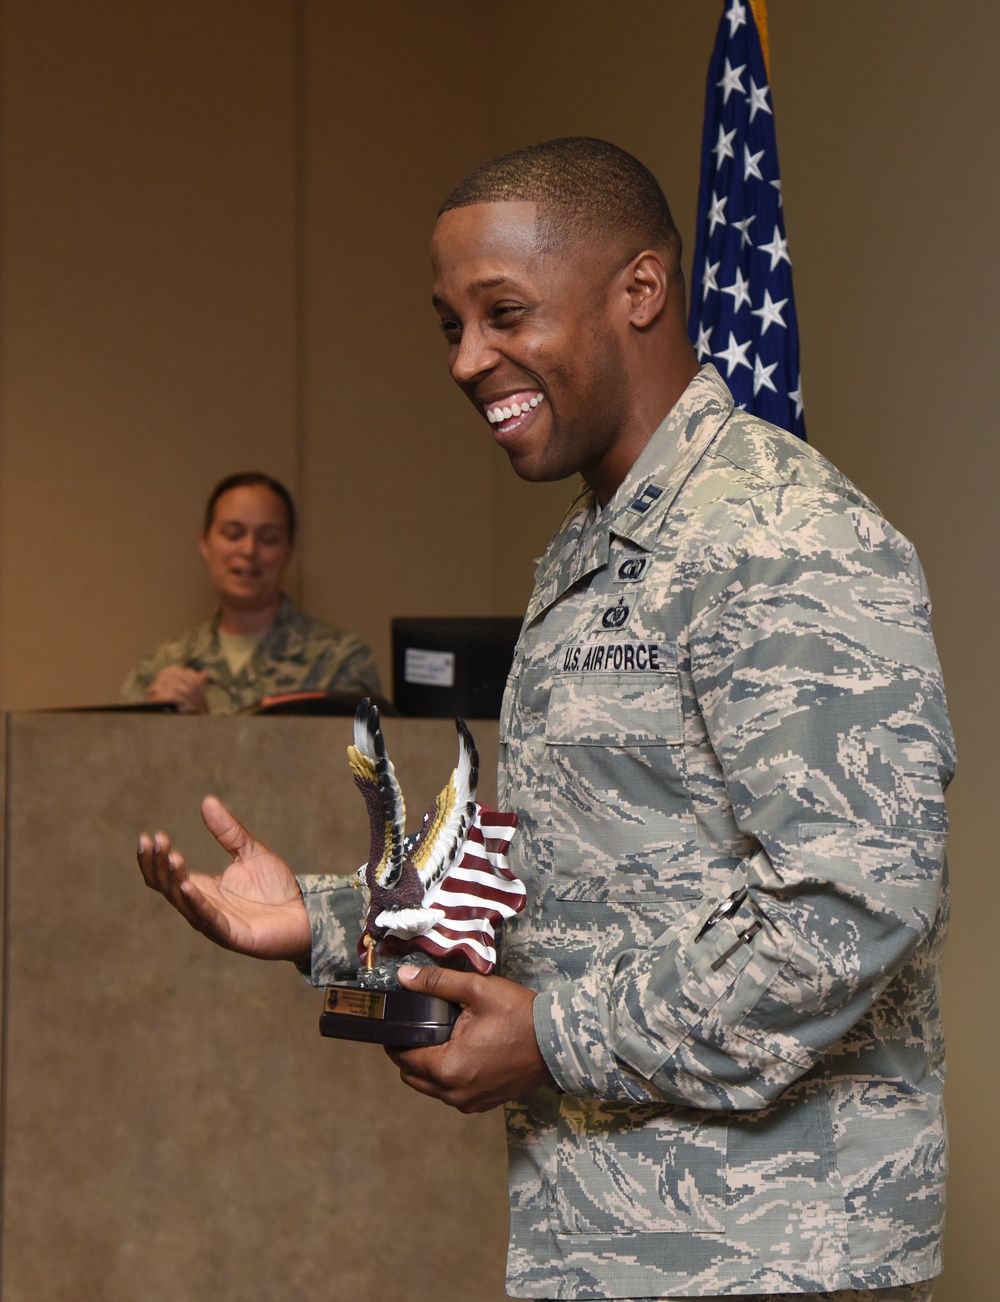 Keesler Airman receives award from airfield ops legend